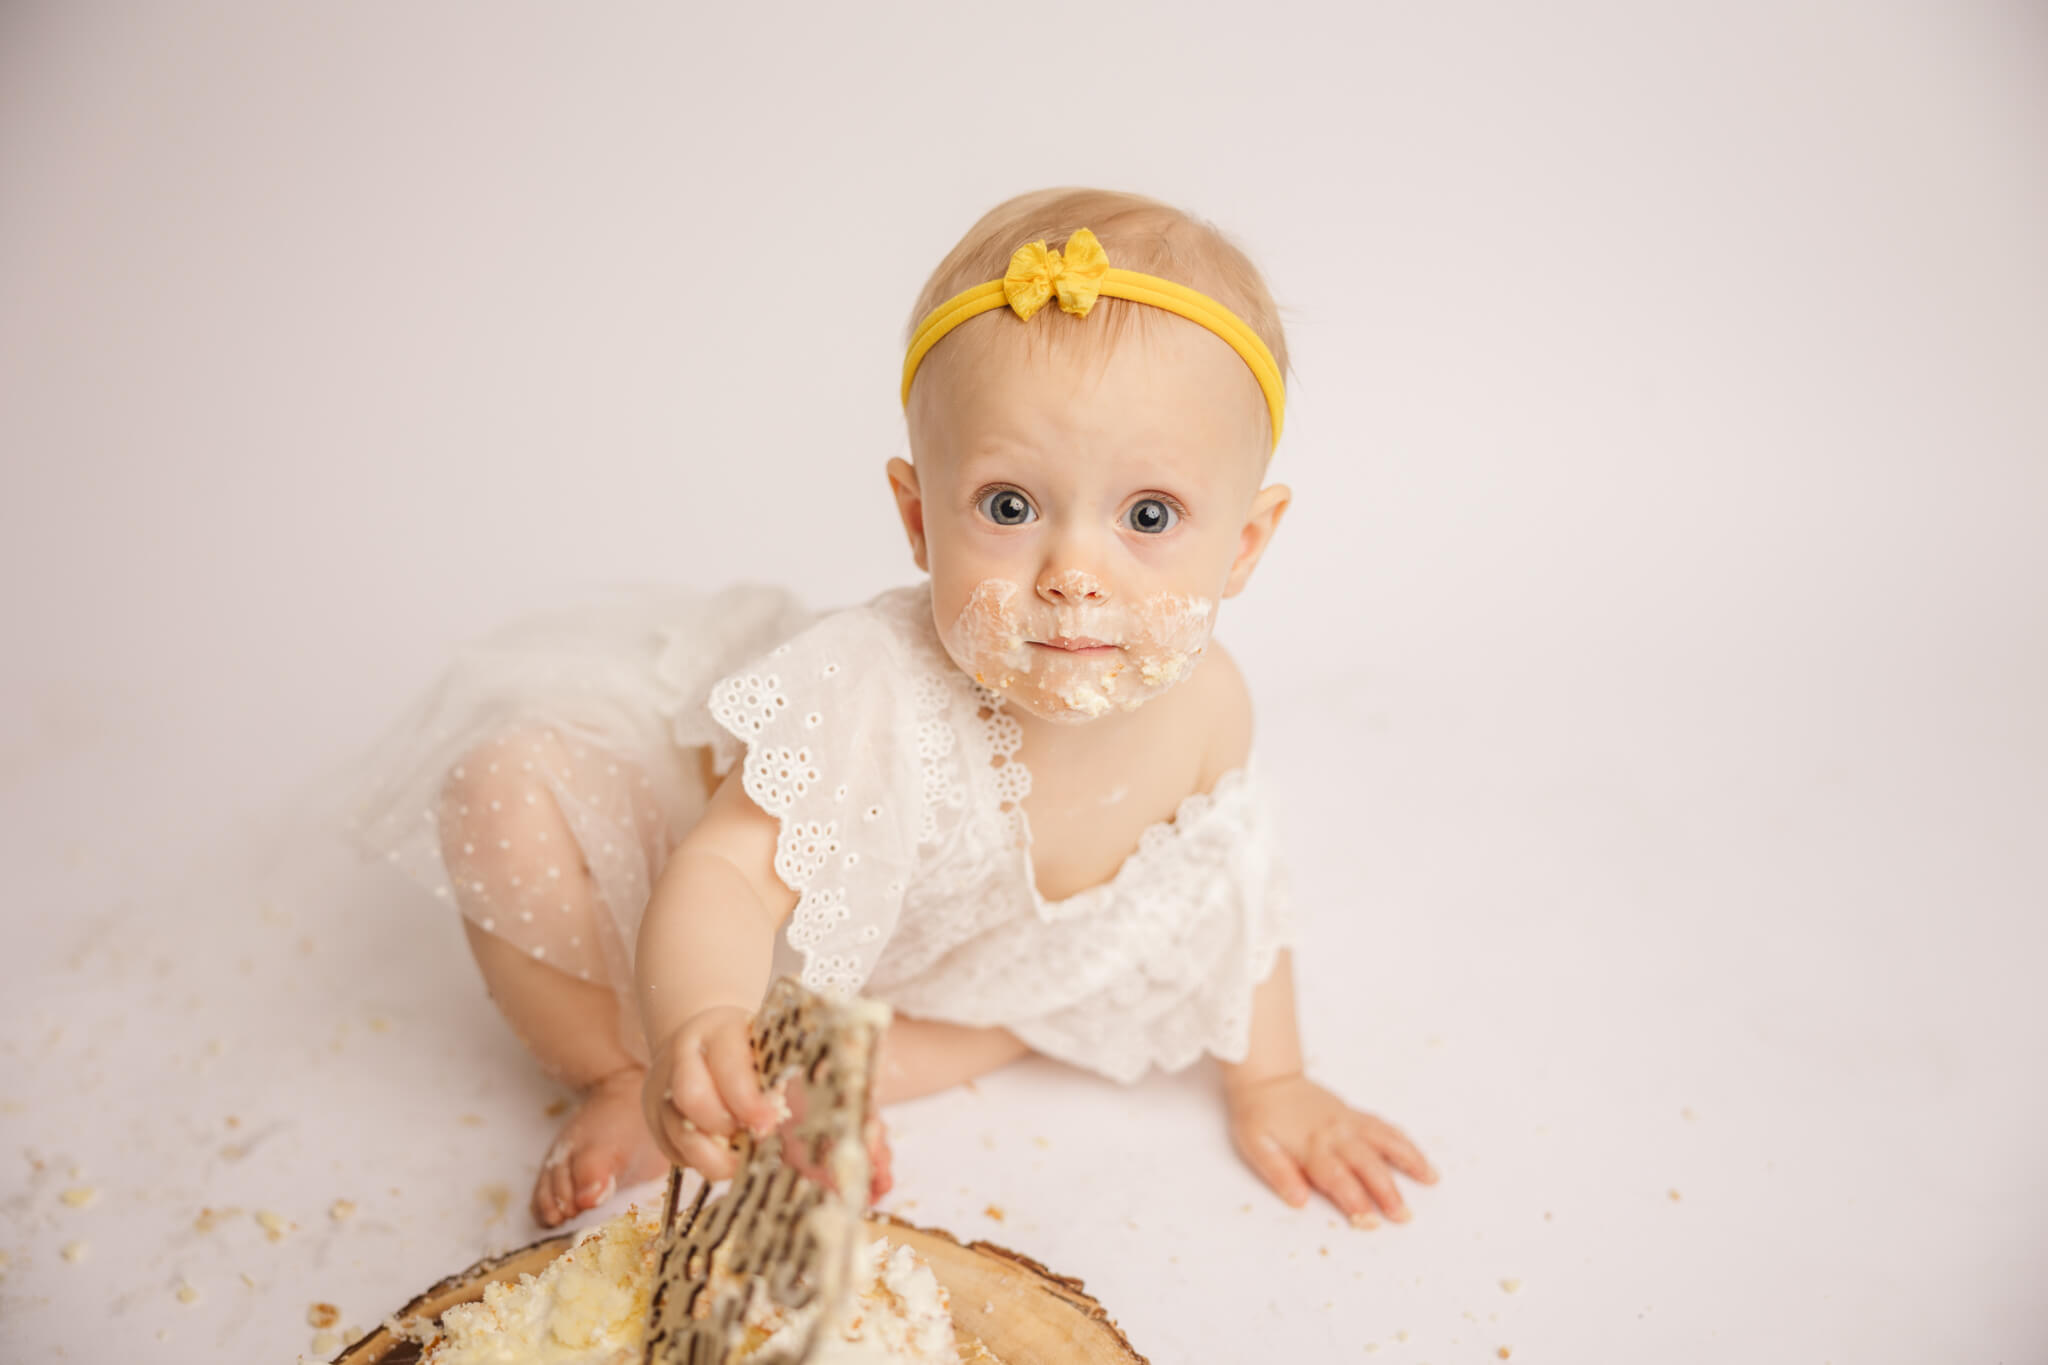 Baby girl playing with her cake topper during her one year session in the studio captured by the augusta cake smash photographer, molly berry